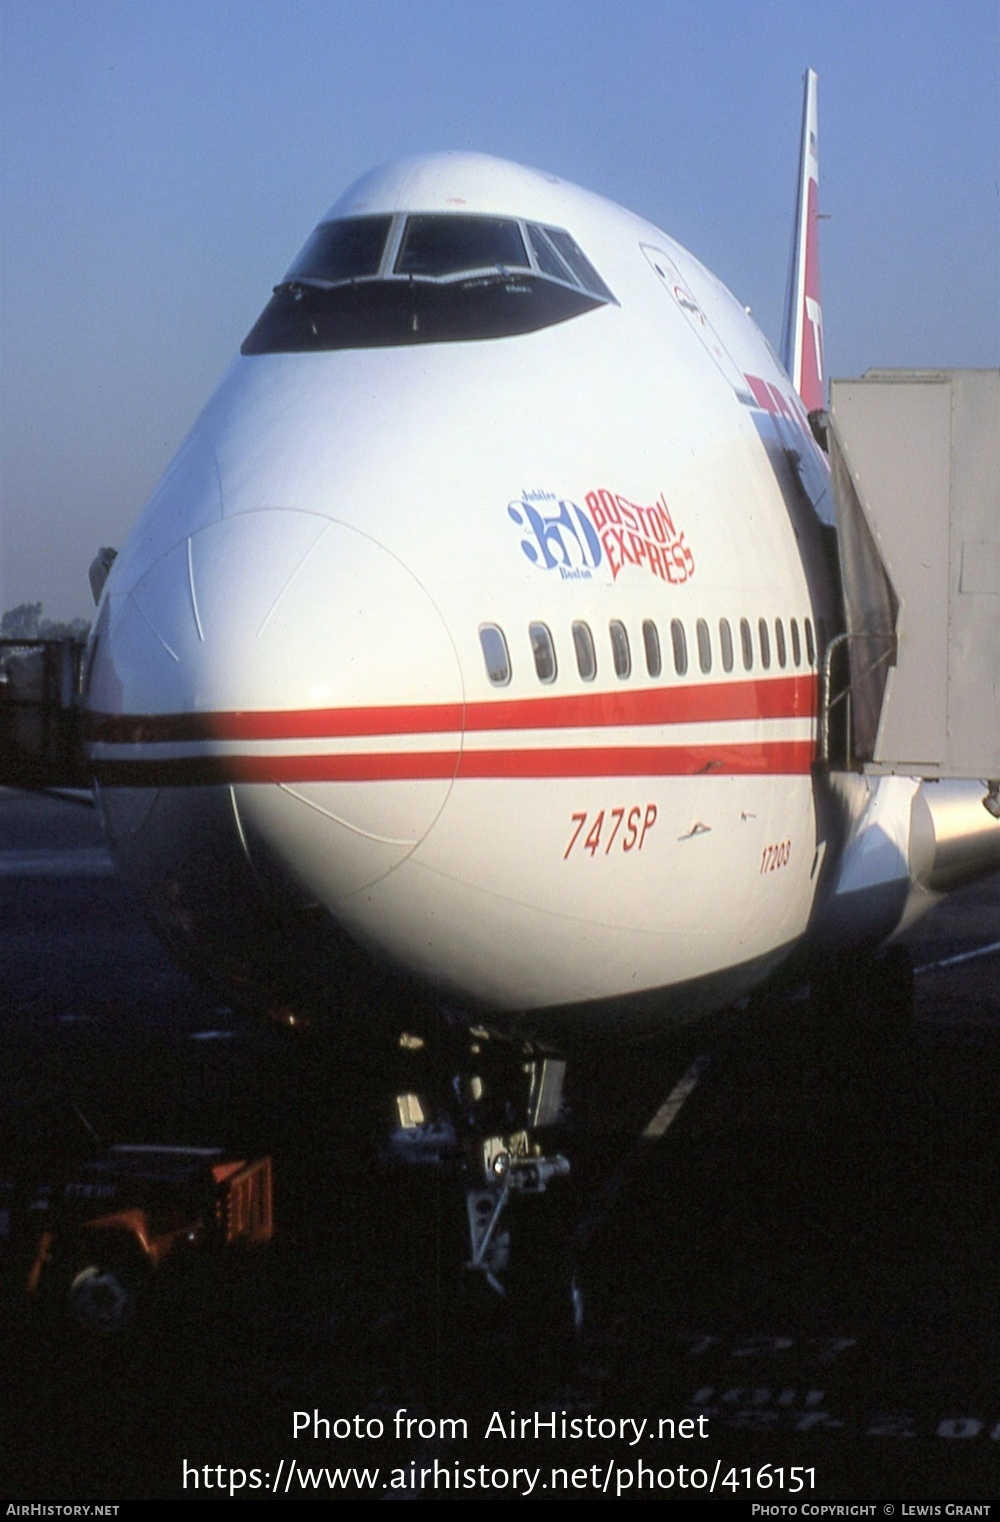 The Story Of TWA's Boeing 747SPs 